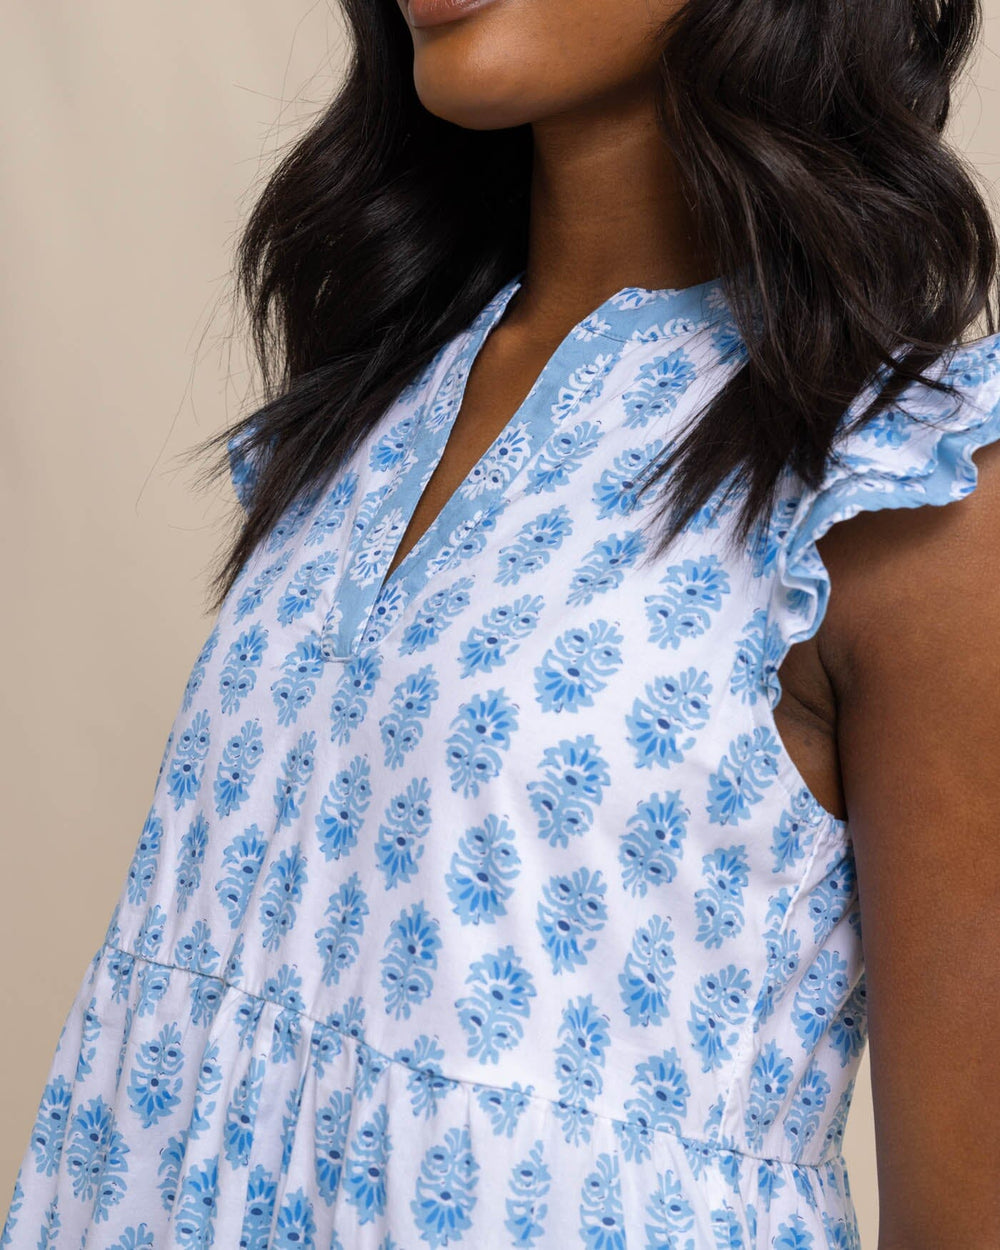 The detail view of the Southern Tide Eloise Garden Variety Printed Dress by Southern Tide - Classic White